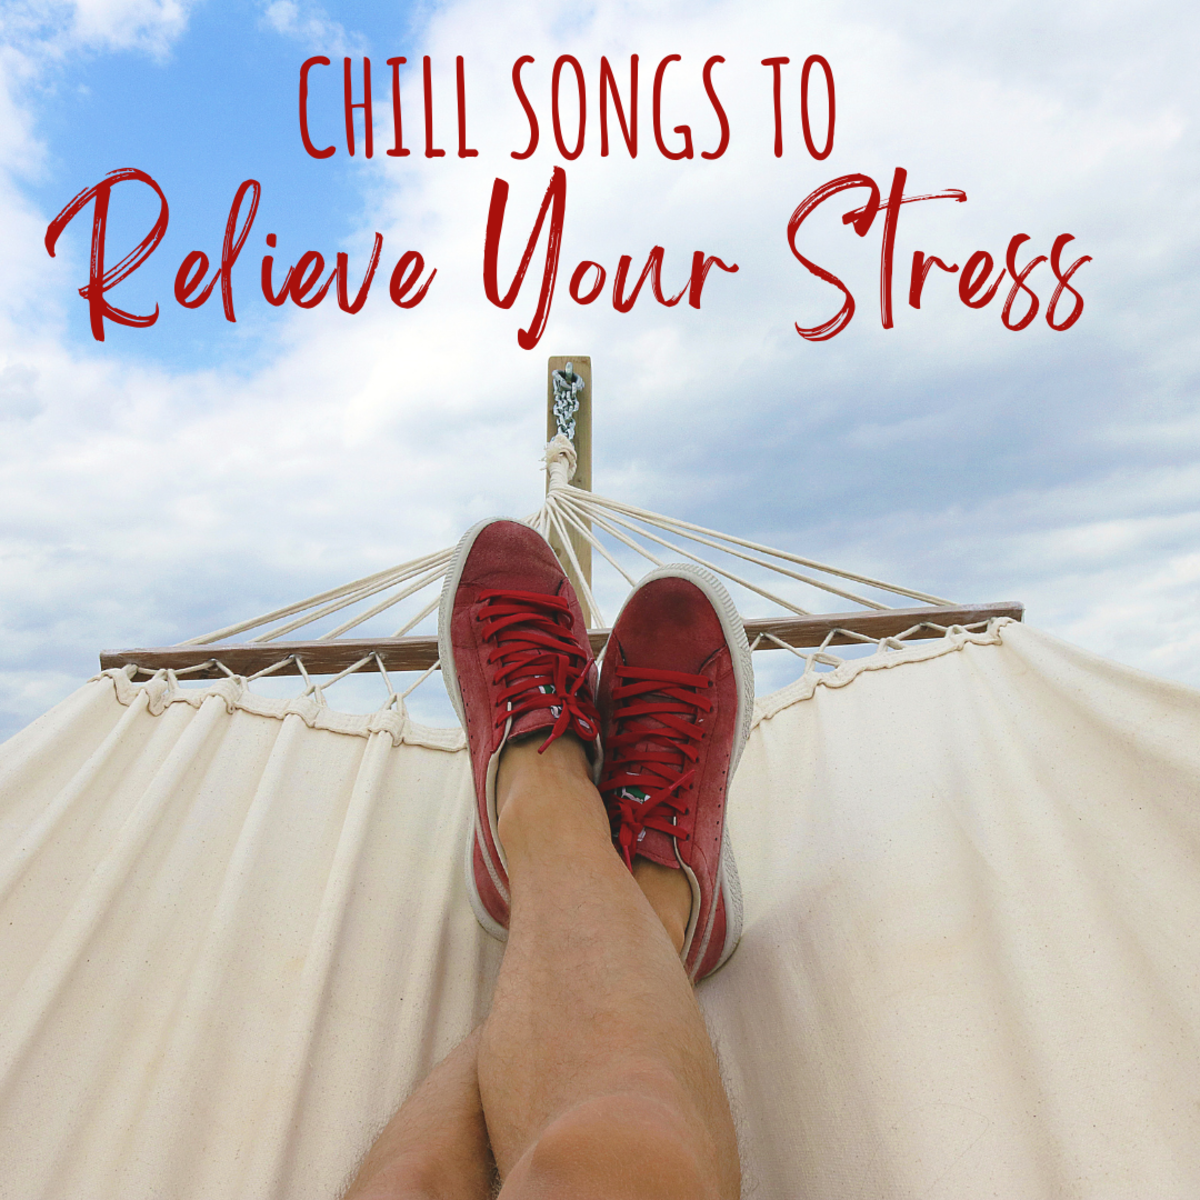 77 Chill and Calming Songs to Help You Relax and Relieve Stress